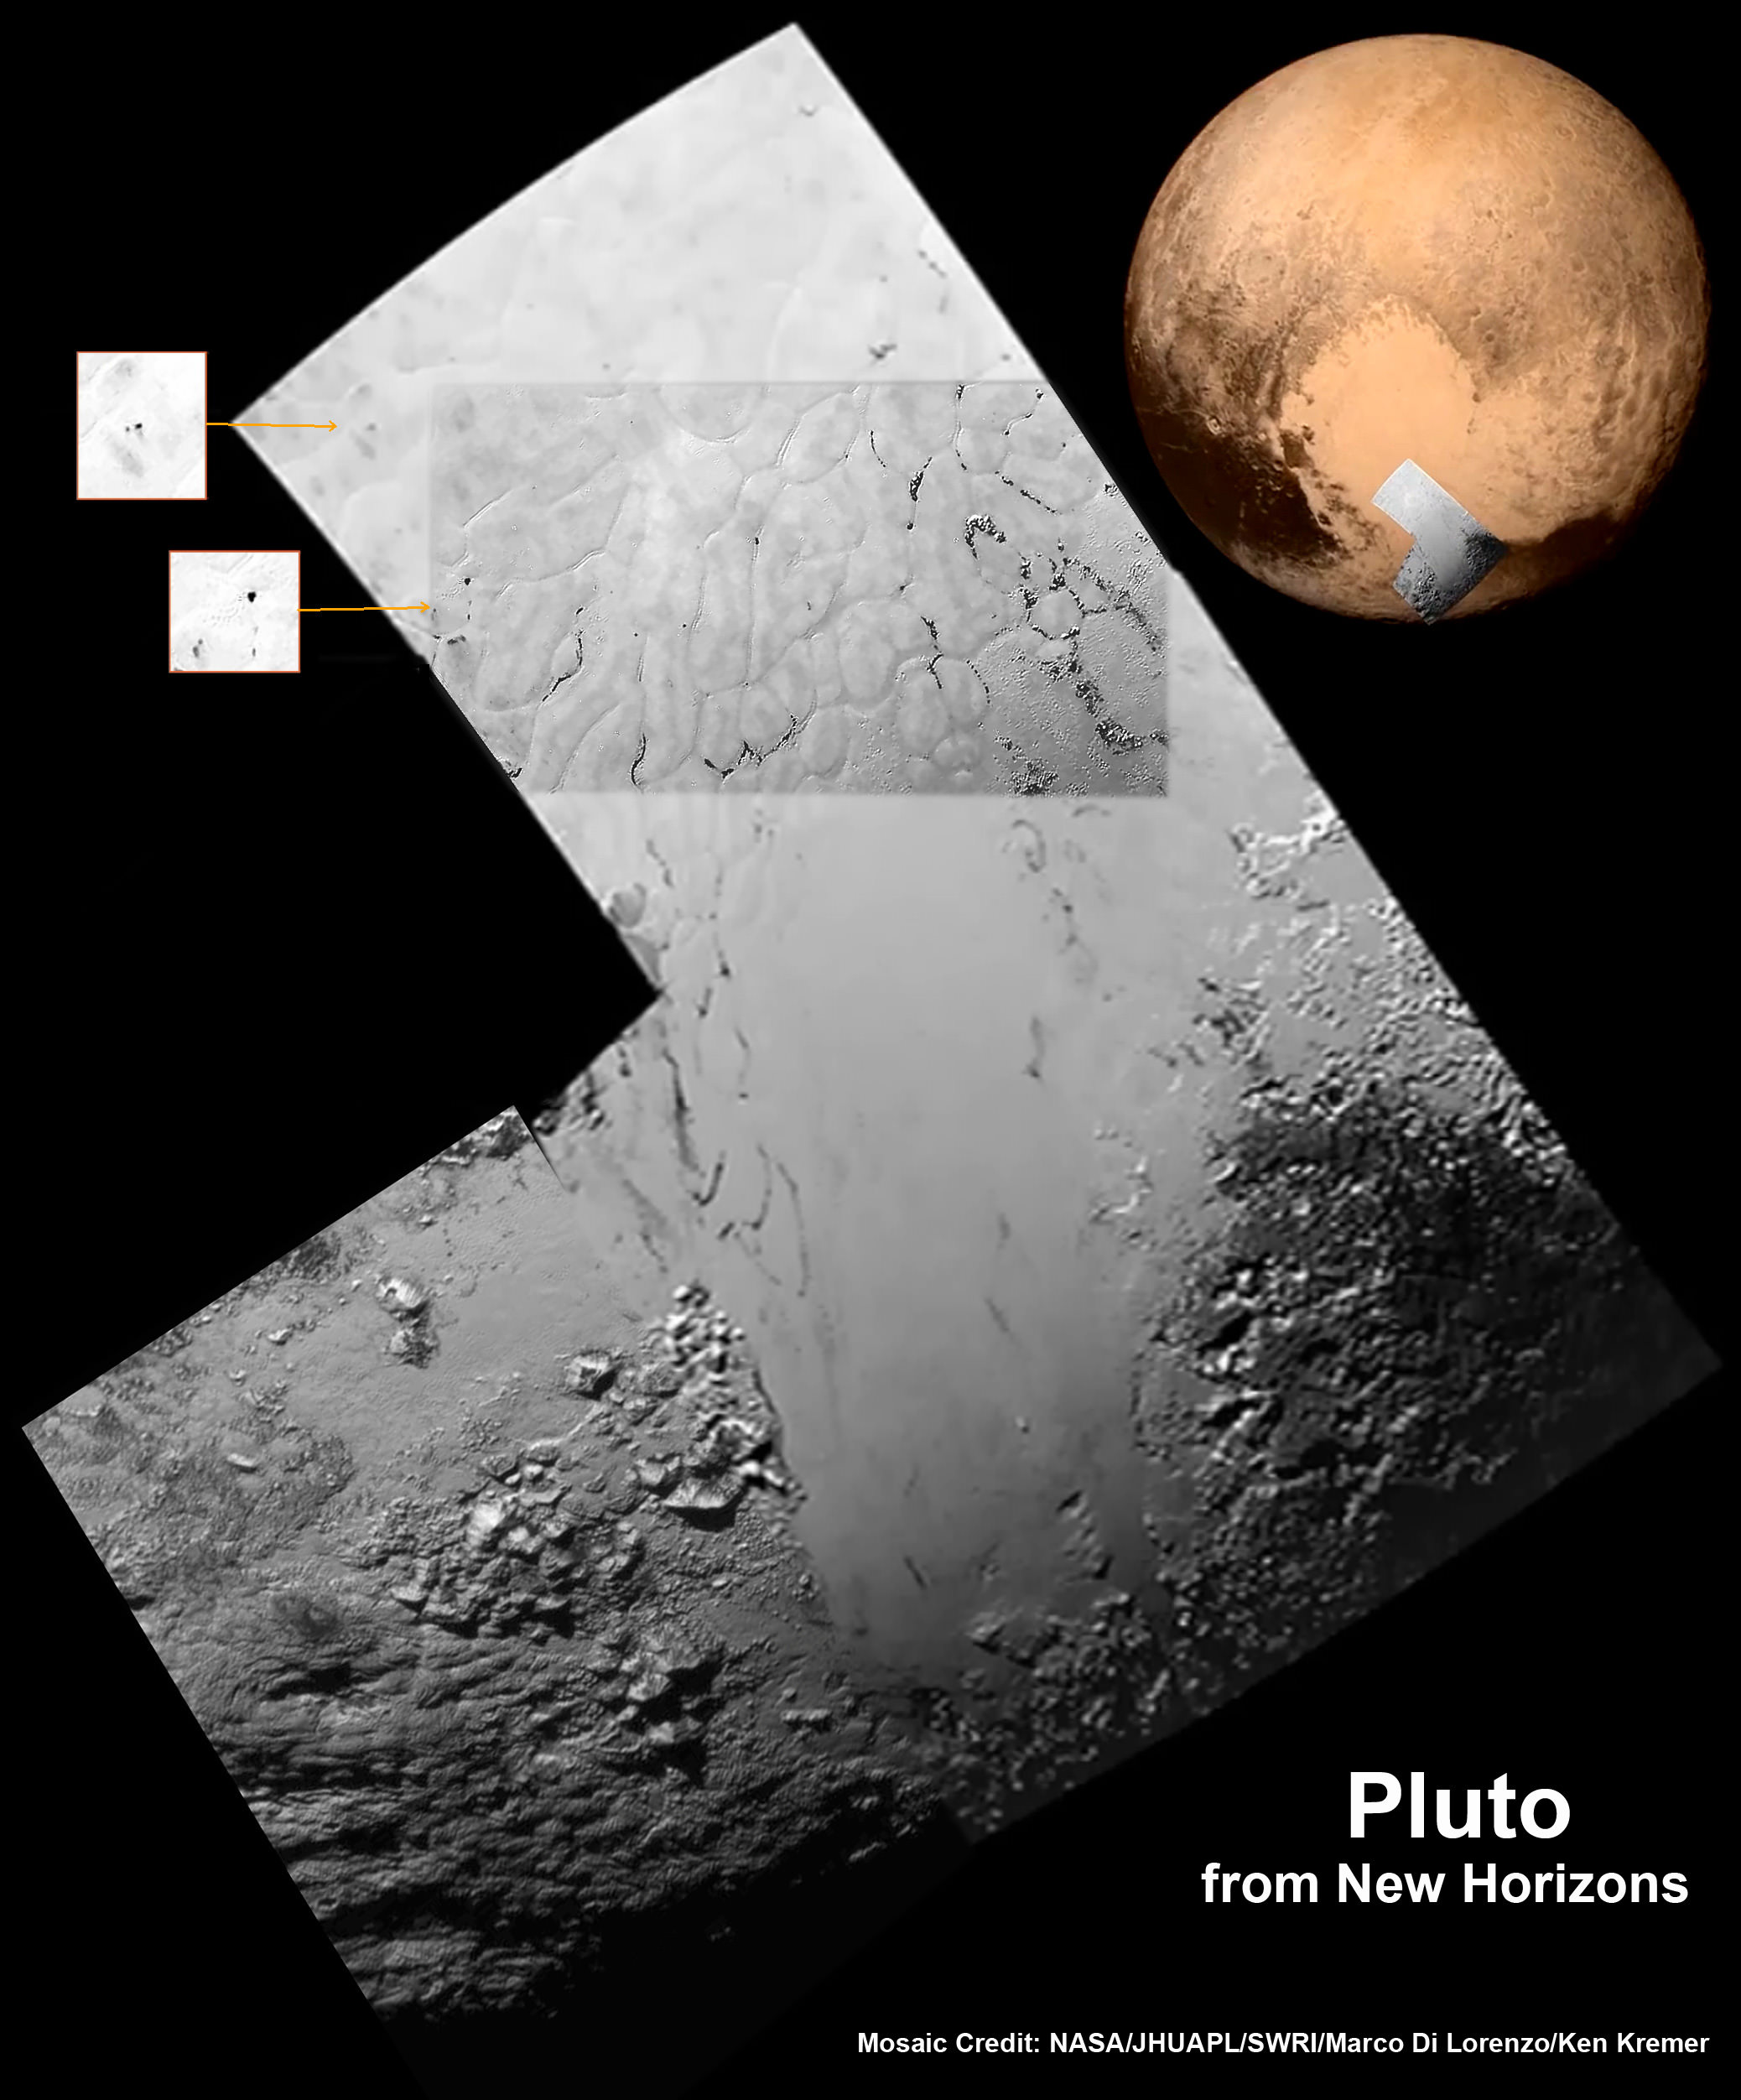 Hi Res mosaic of ‘Tombaugh Regio’ shows the heart-shaped region on Pluto and focuses on icy mountain ranges of ‘Norgay Montes’ and ice plains of ‘Sputnik Planum.’ The new mosaic combines highest resolution imagery captured by NASA’s New Horizons LORRI imager during history making closest approach flyby on July 14, 2015.   Inset at left shows possible wind streaks.  Inset at right shows global view of Pluto with location of huge heart-shaped region in context.  Credit: NASA/JHUAPL/SWRI/ Marco Di Lorenzo/Ken Kremer/kenkremer.com